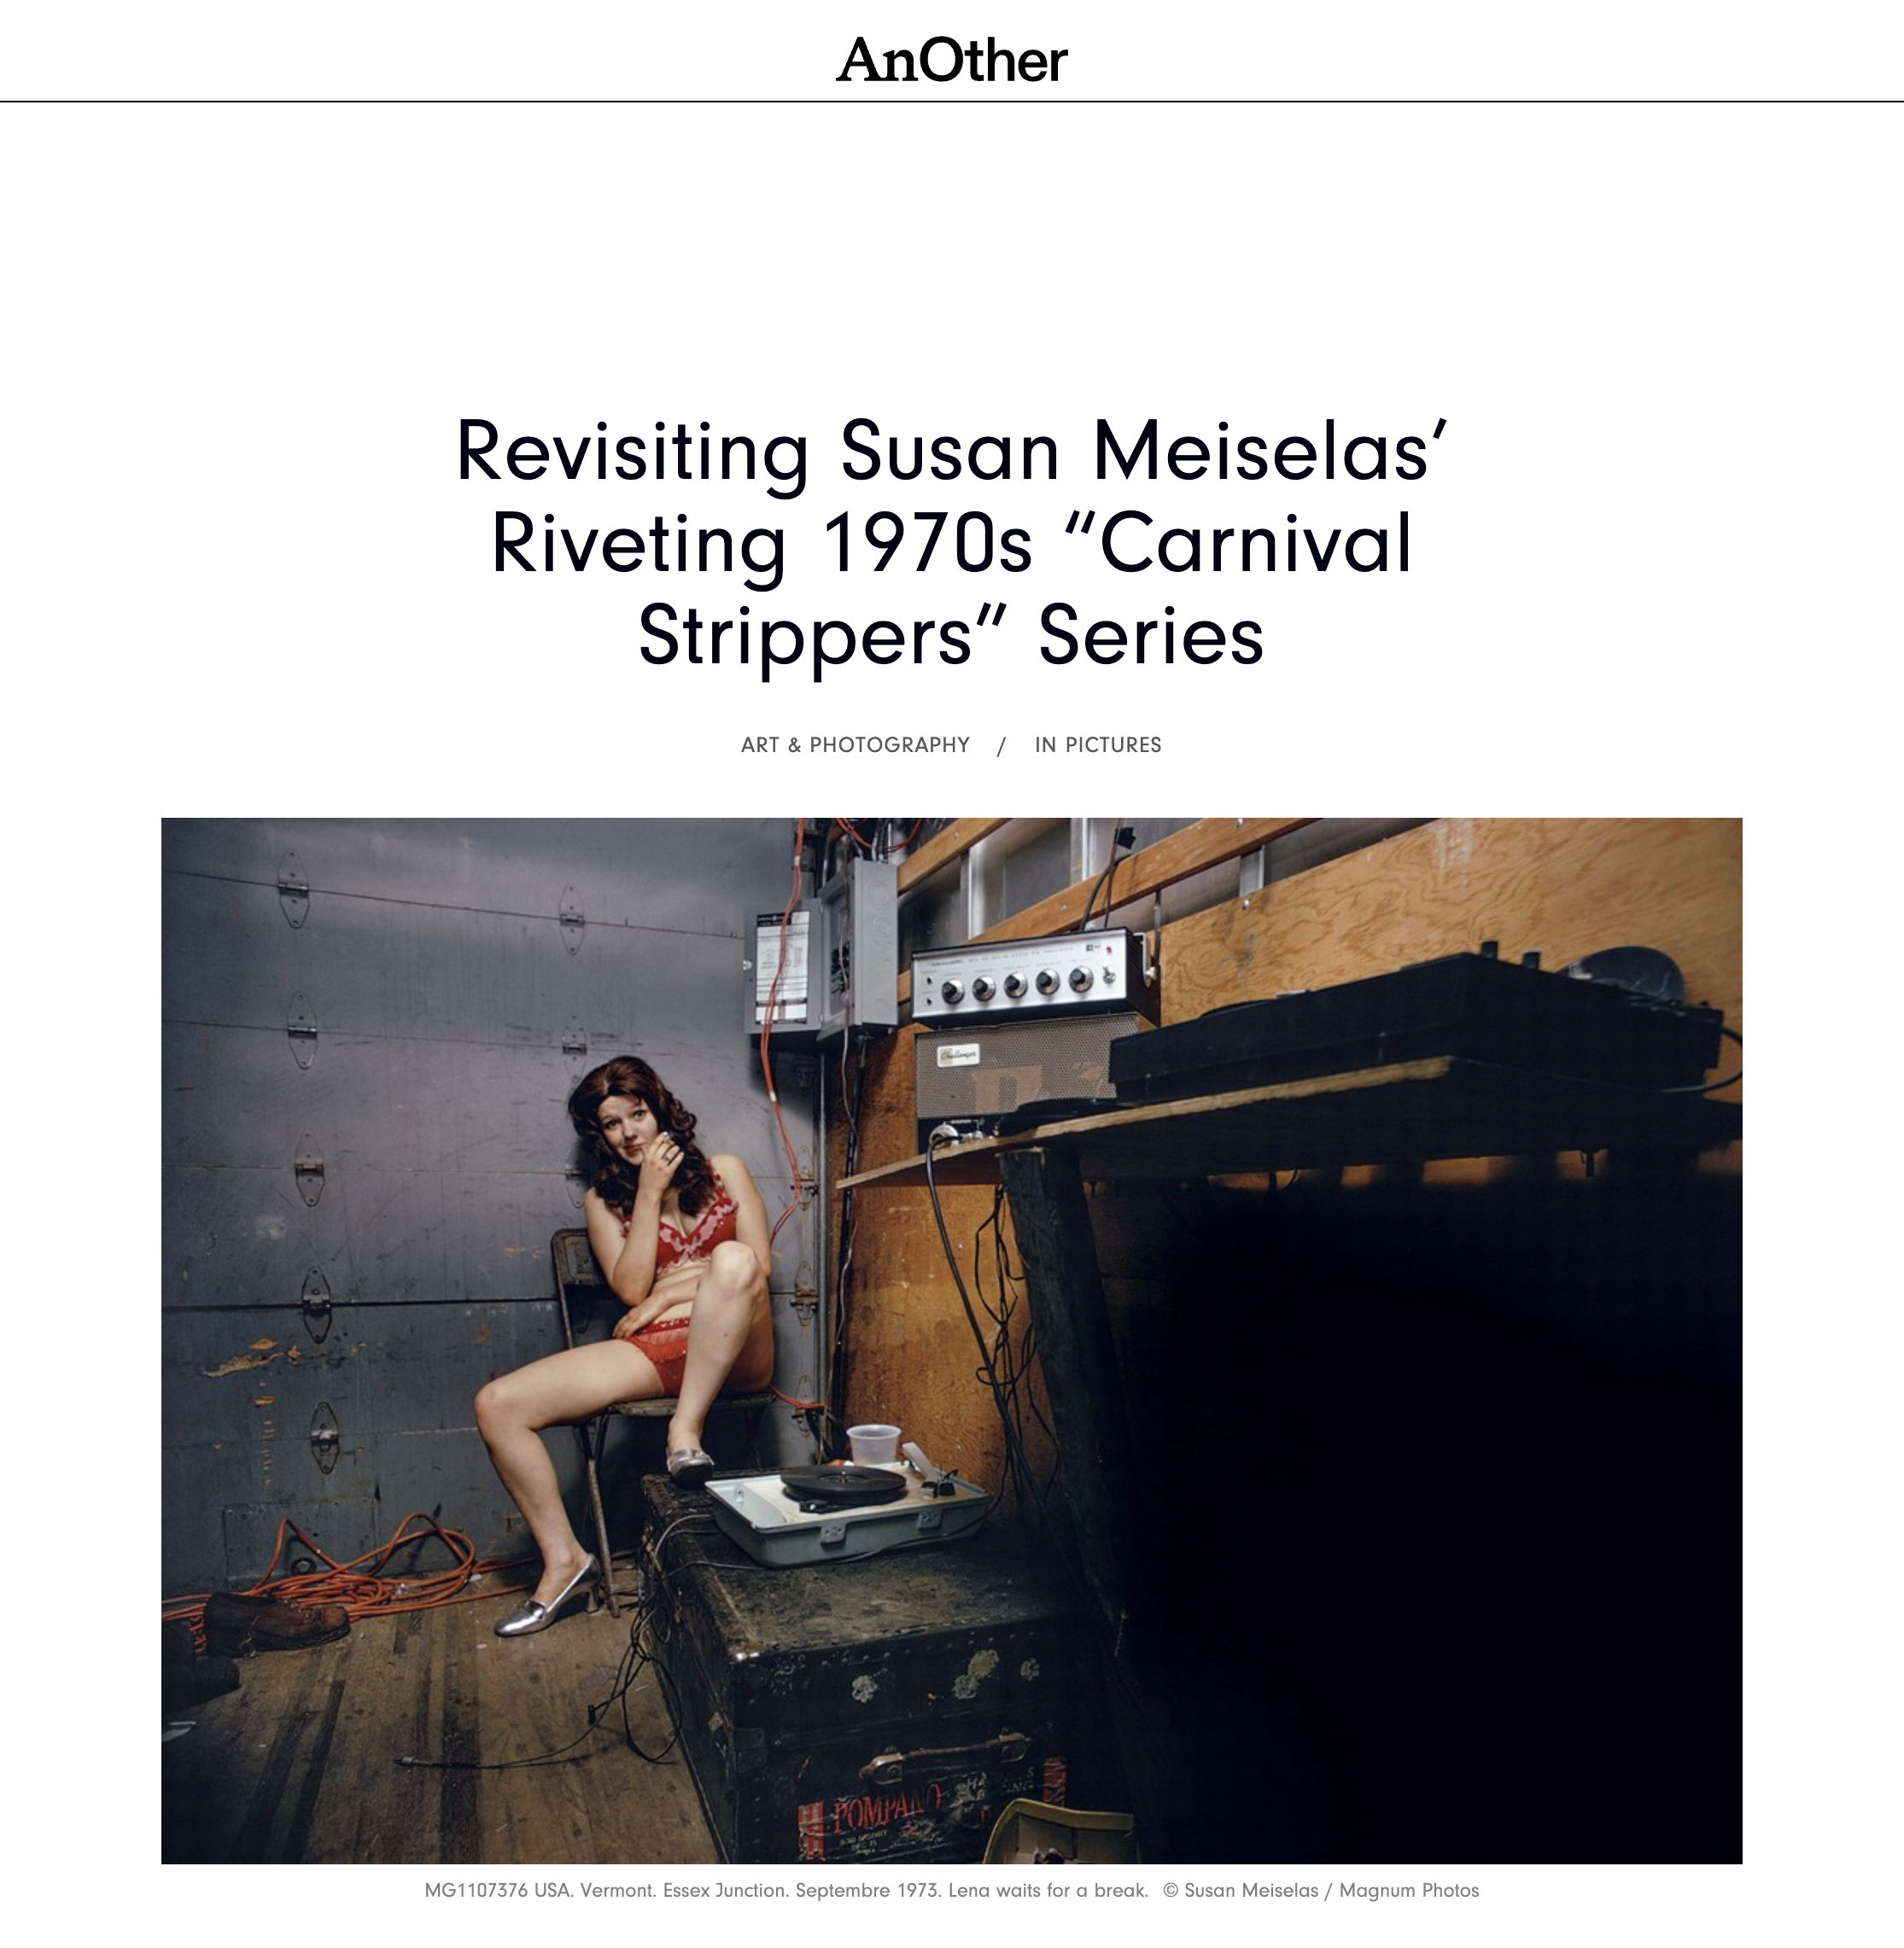 Thumbnail of AnOther Magazine: Revisiting Susan Meiselas’ Riveting 1970s “Carnival Strippers” Series